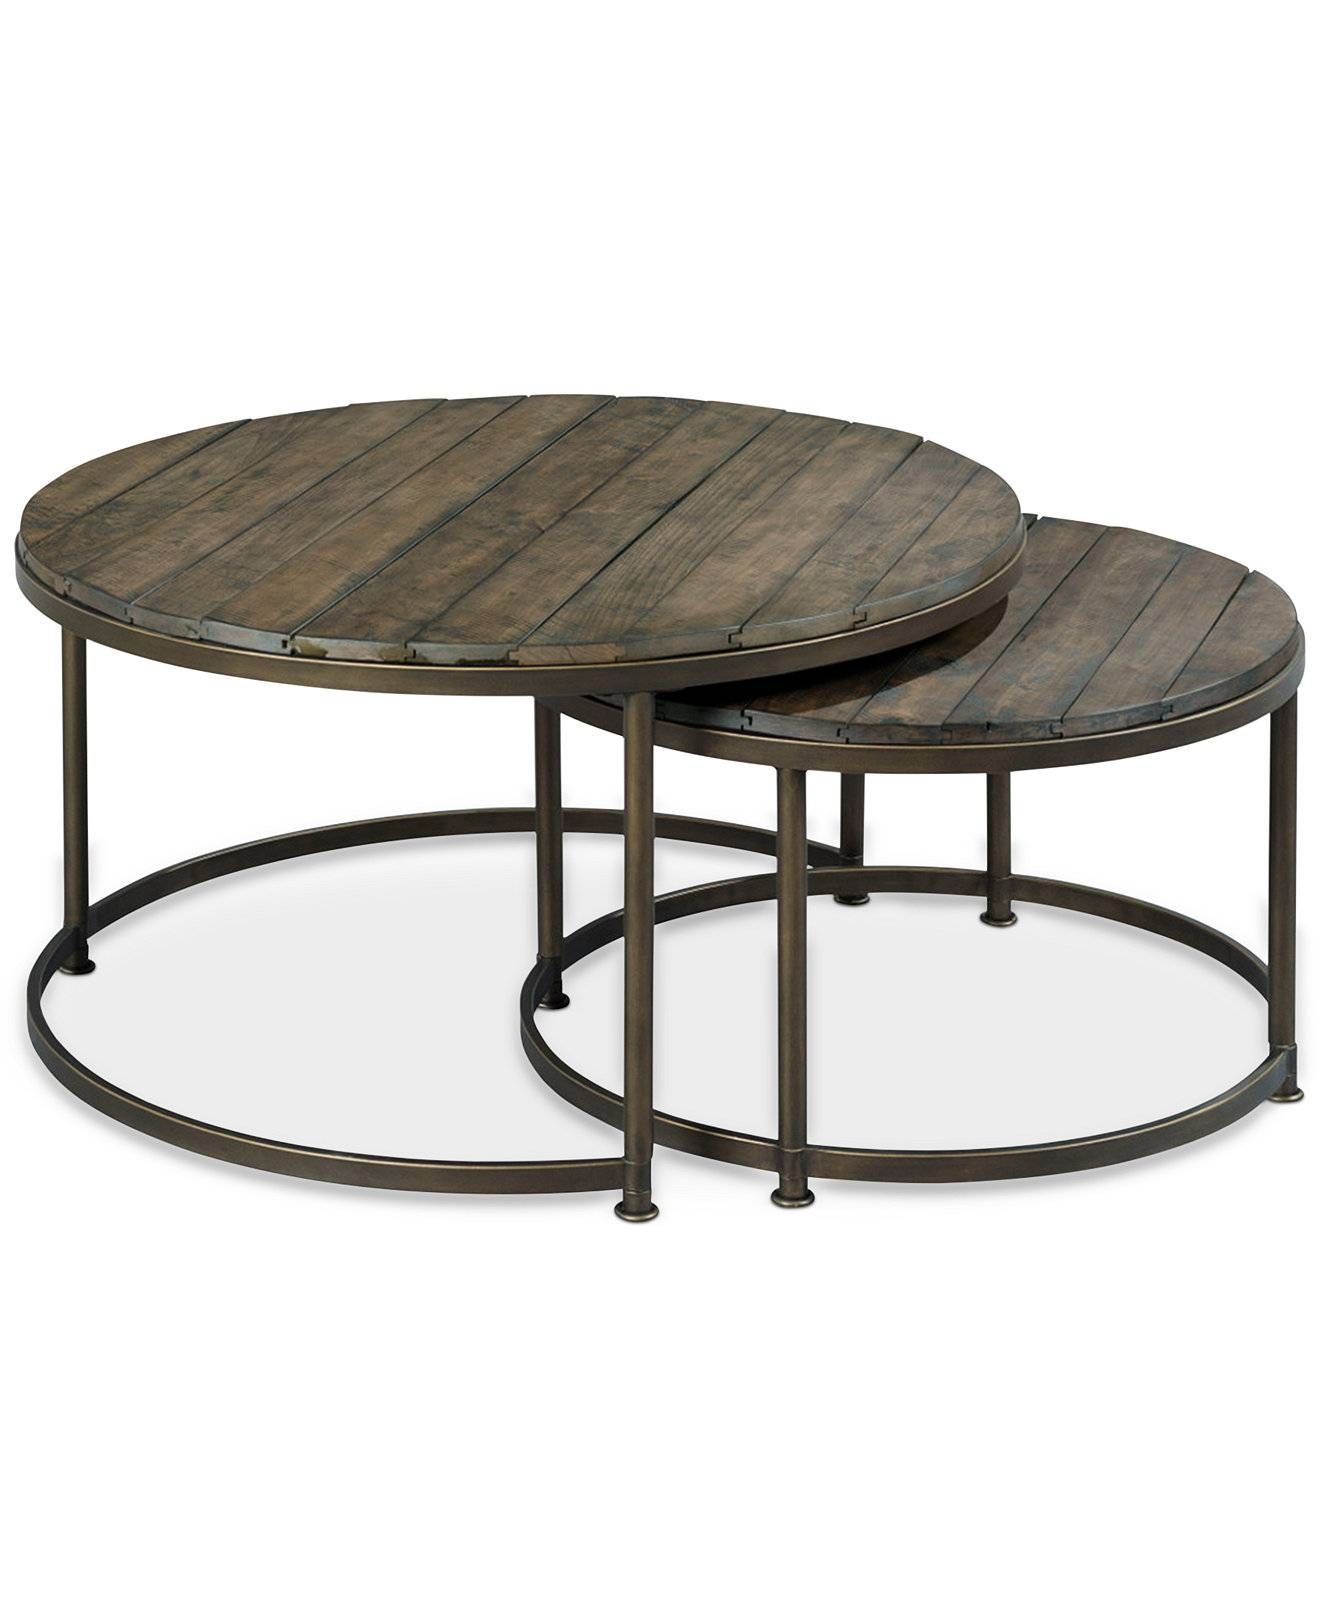 Coffee Table: Amazing Circle Coffee Table Ideas Round Black Coffee In Black Circle Coffee Tables (View 16 of 30)